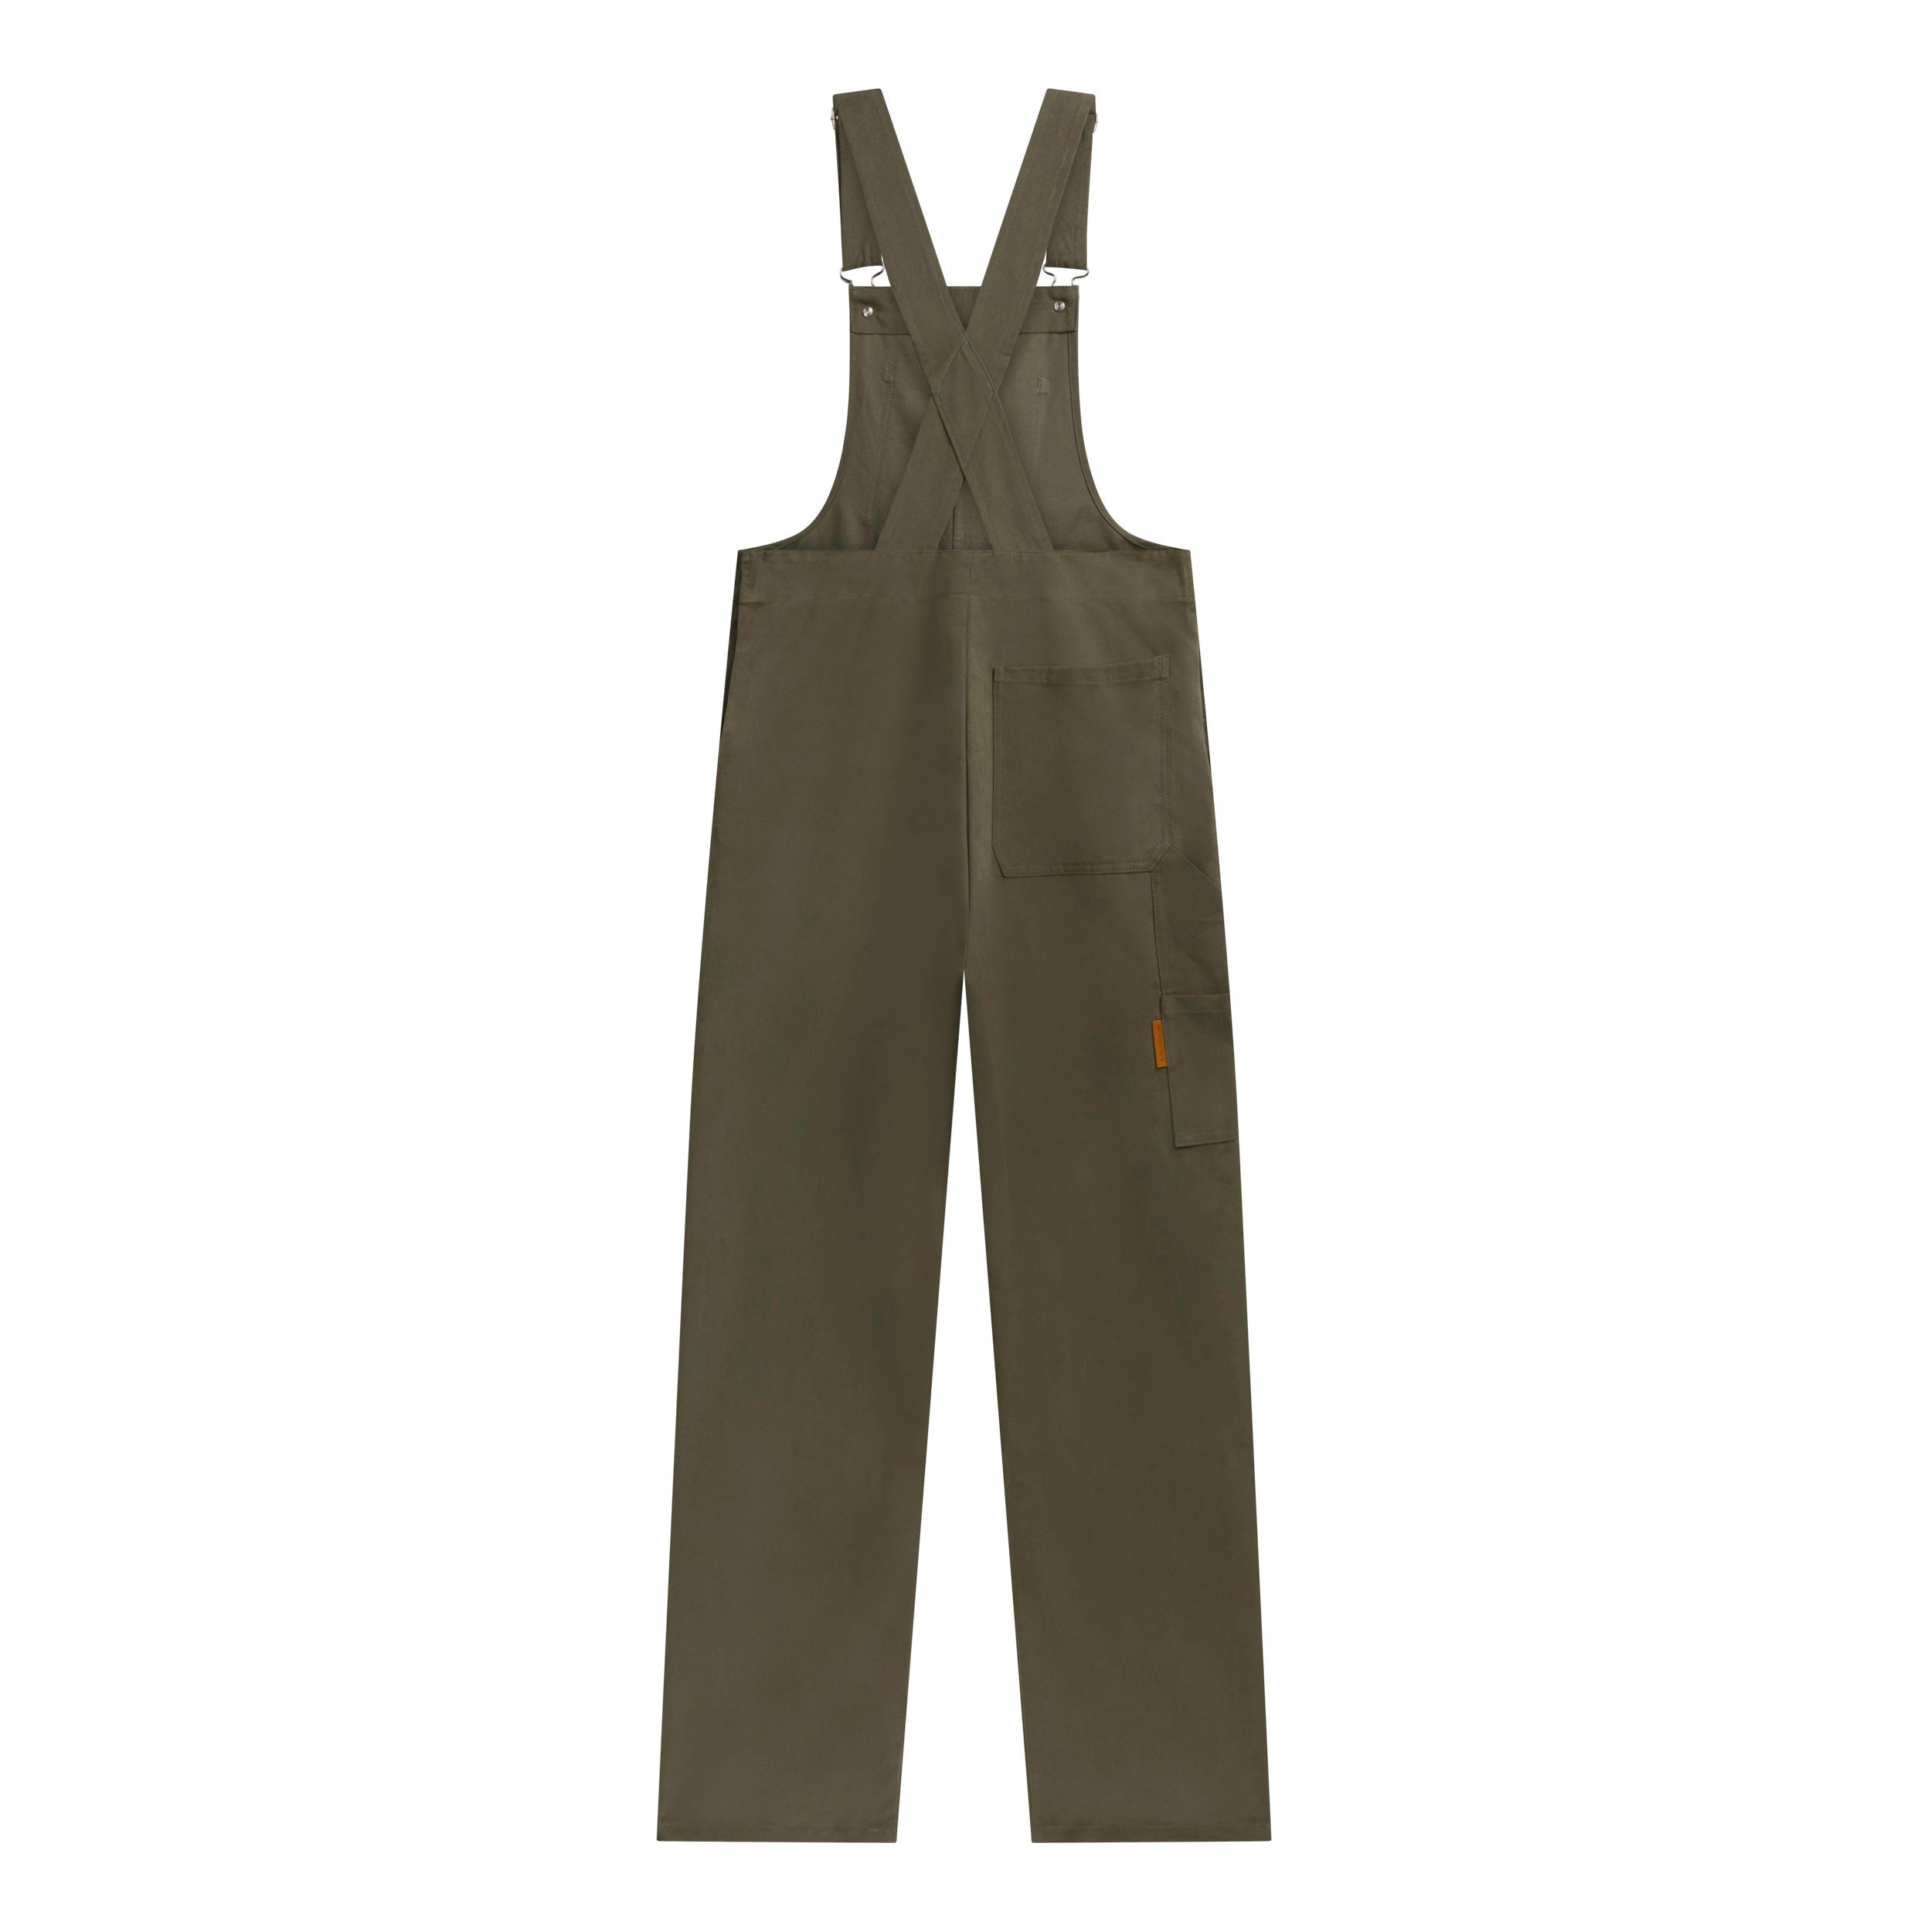 Carrier Company Women's Dungarees in Olive